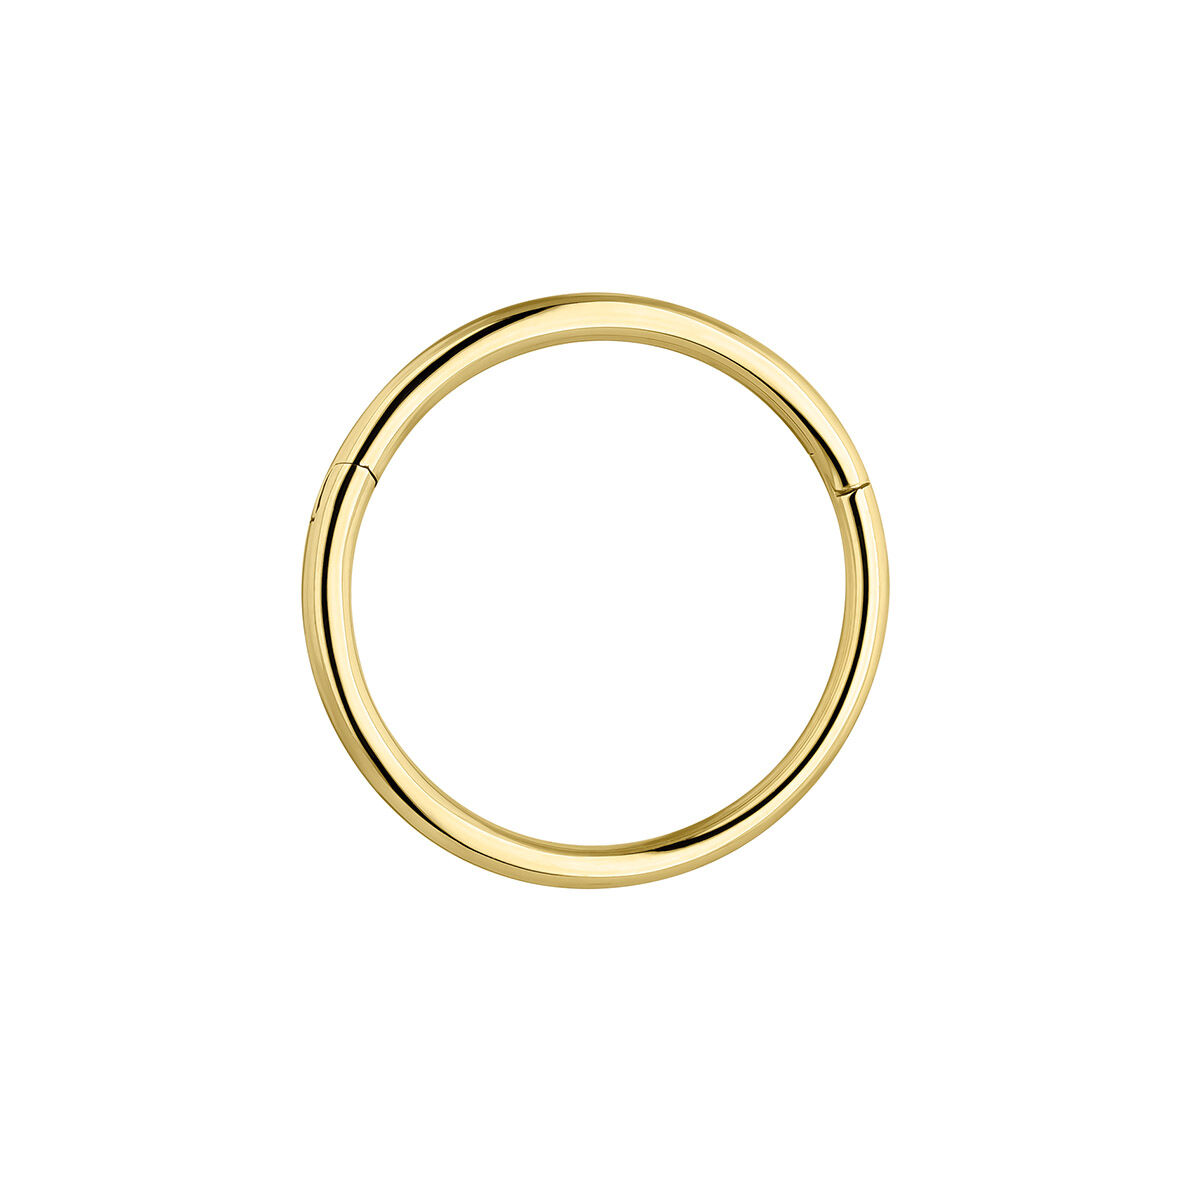 Single 9kt yellow gold small hoop earring, J05128-02-H, hi-res